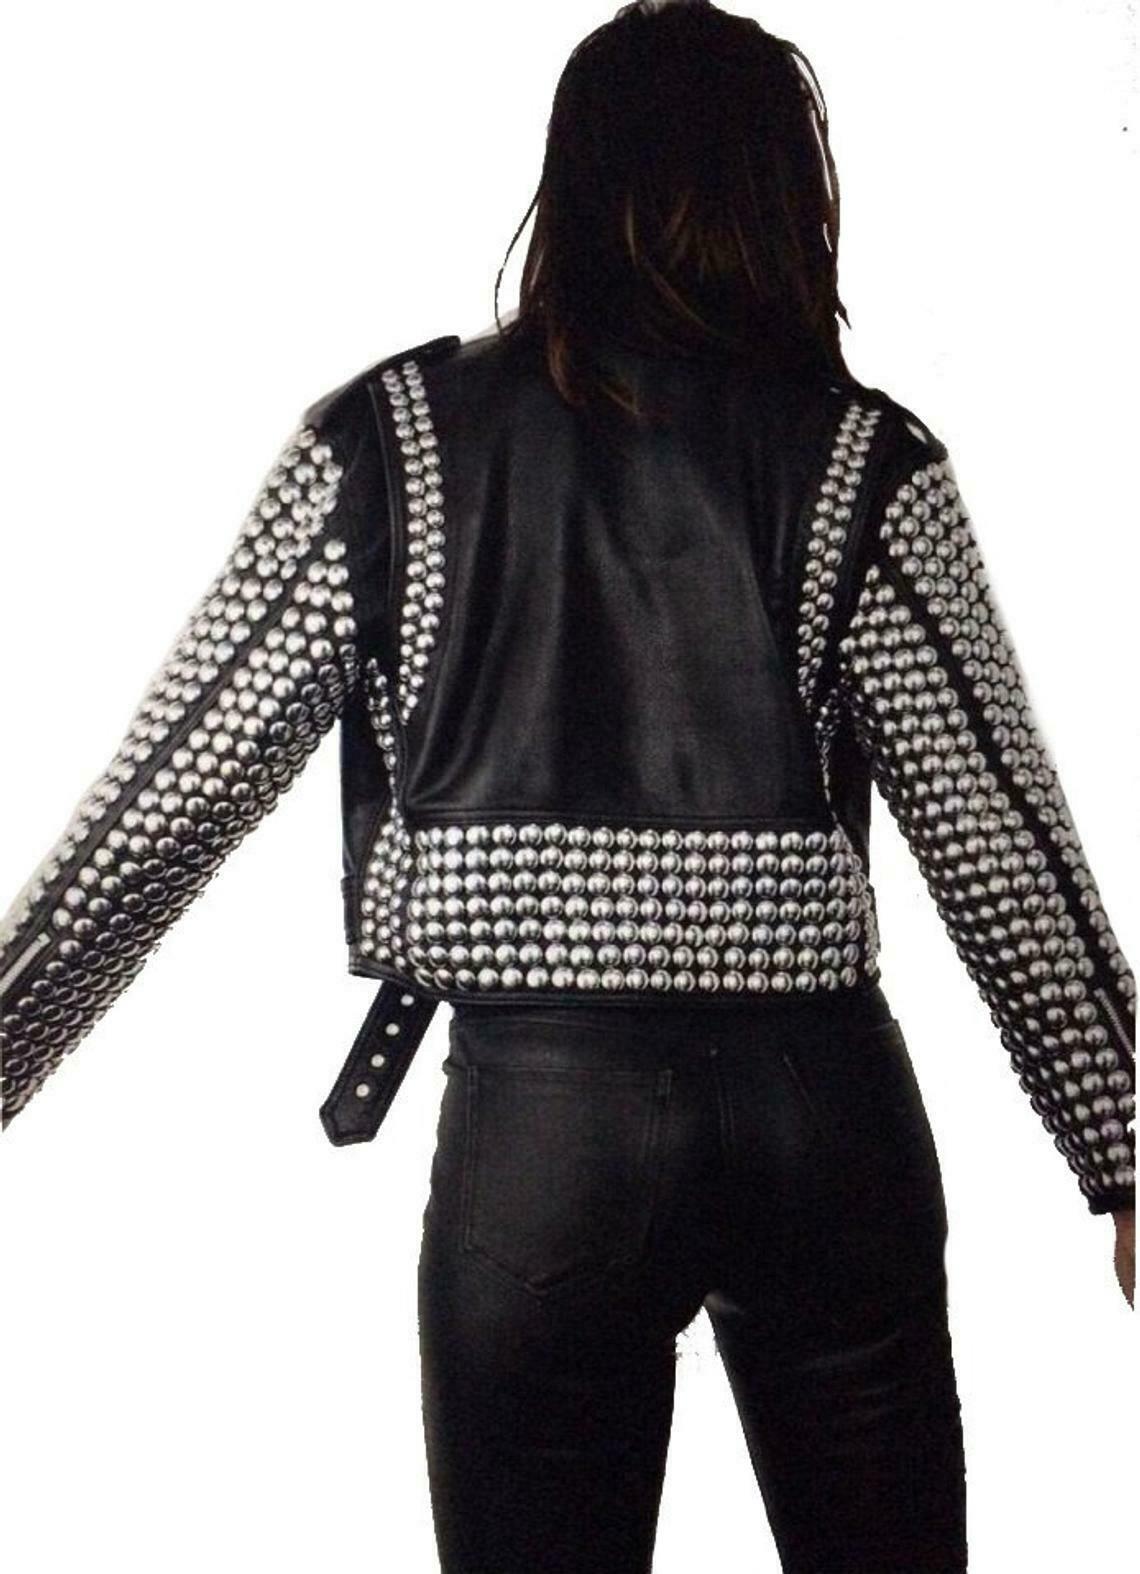 Womens Dome Silver Studded Black Leather Biker Jacket Style Hollywood Celebrity - Luxurena Leather